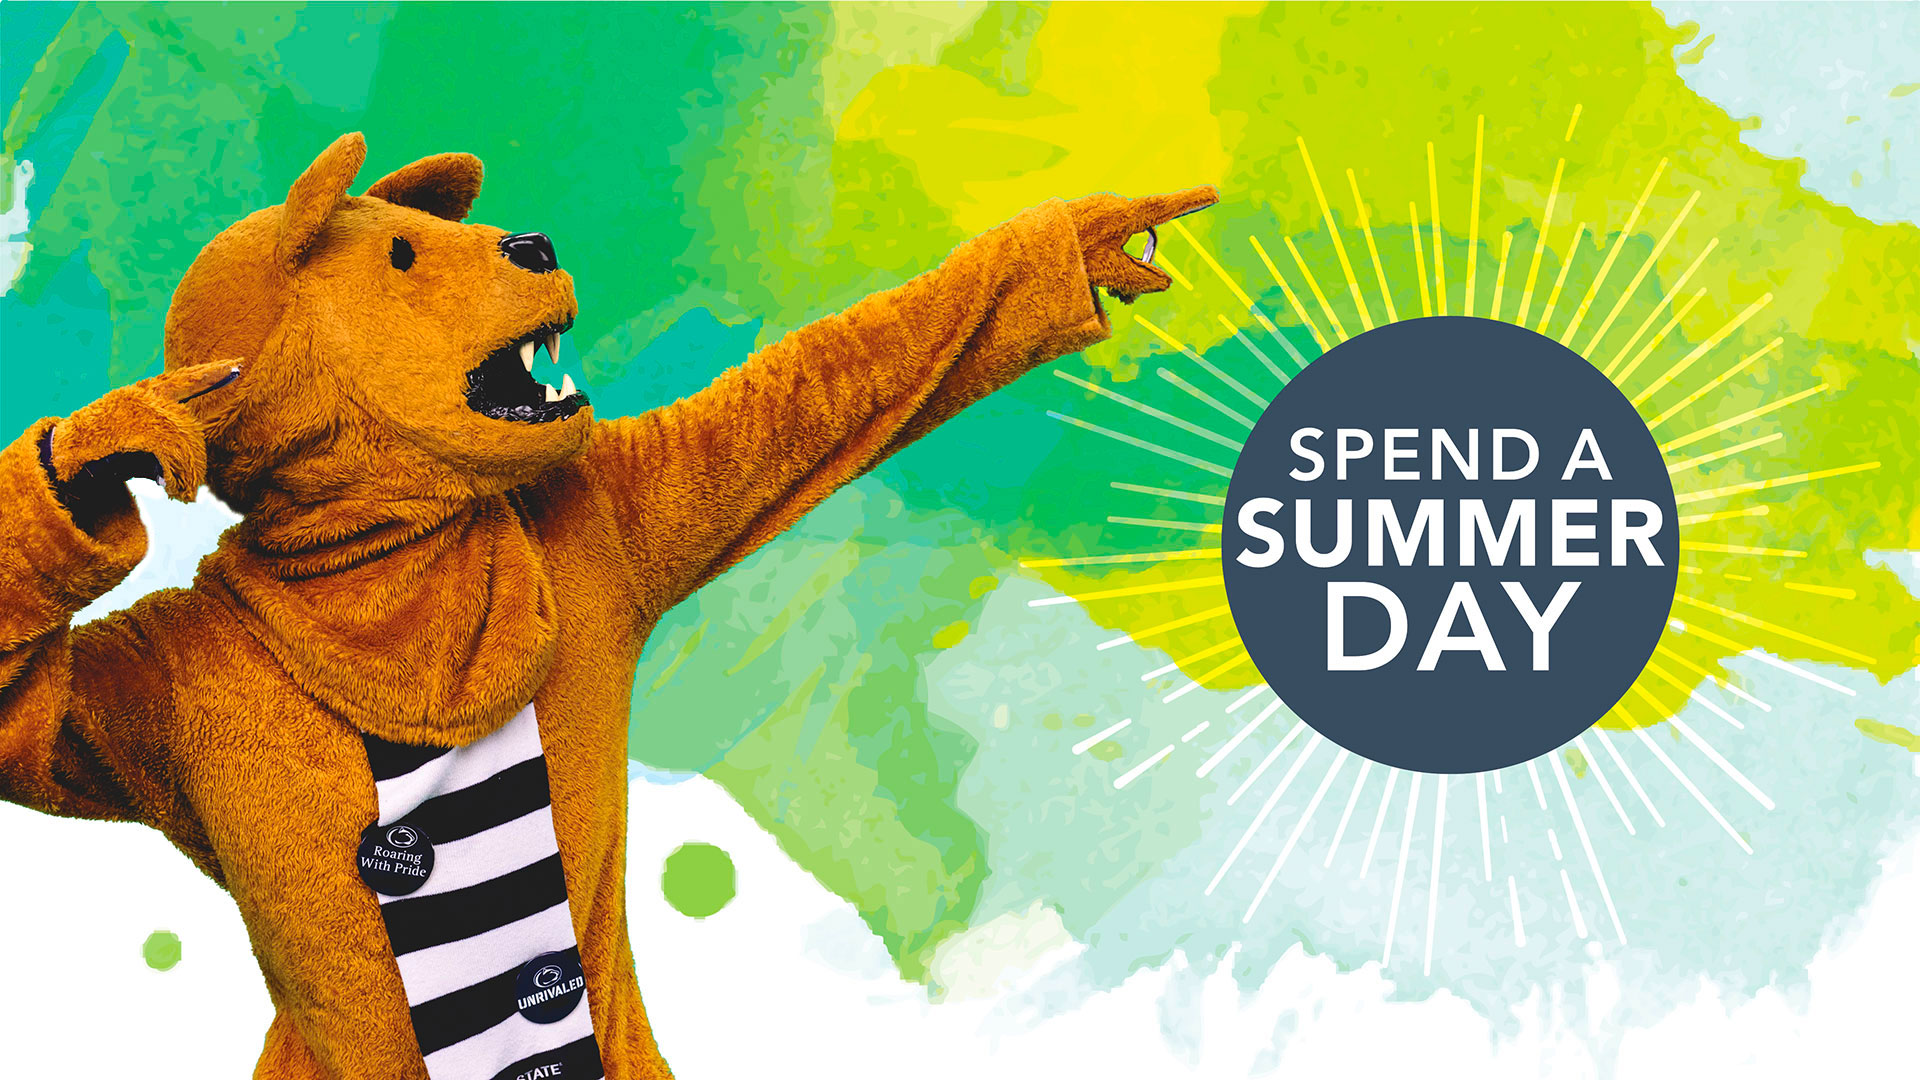 Spend A Summer Day at Penn State